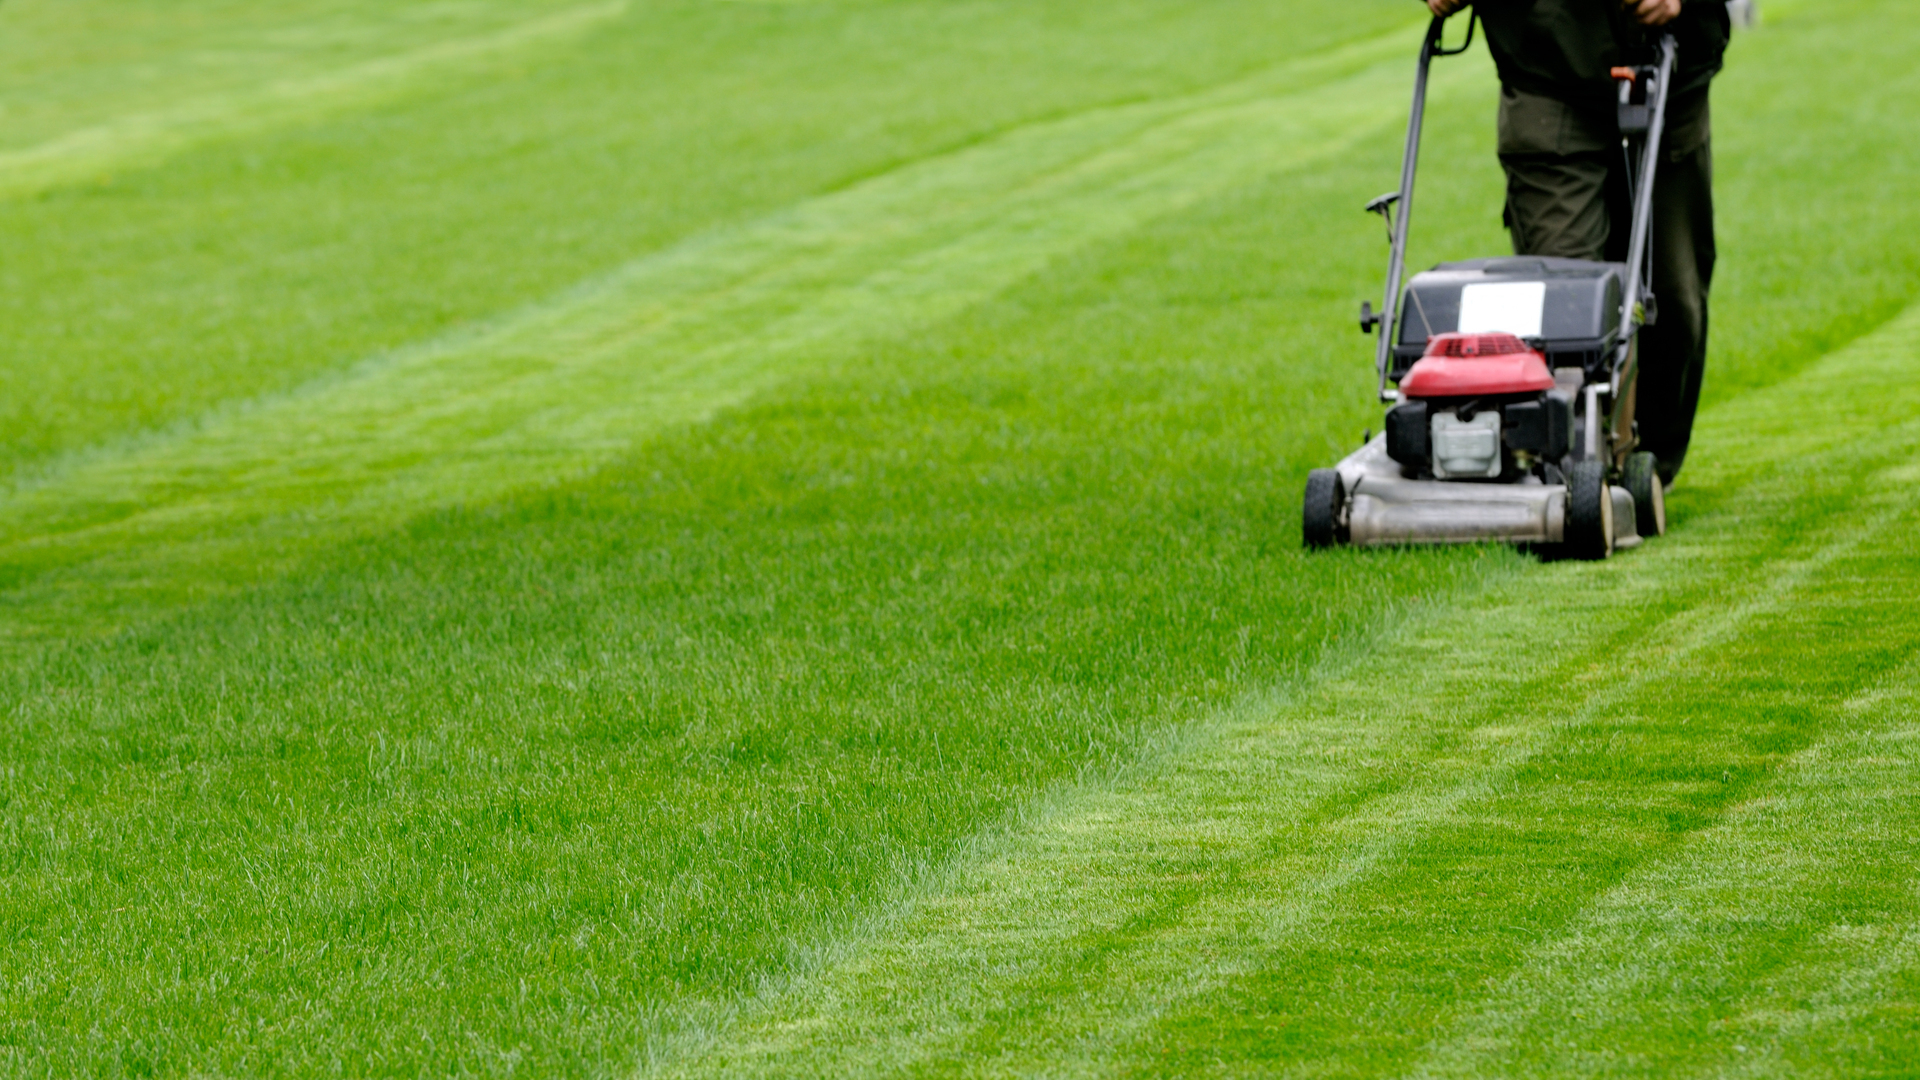 How to Avoid Leaving Tire Marks on Your Grass While Mowing